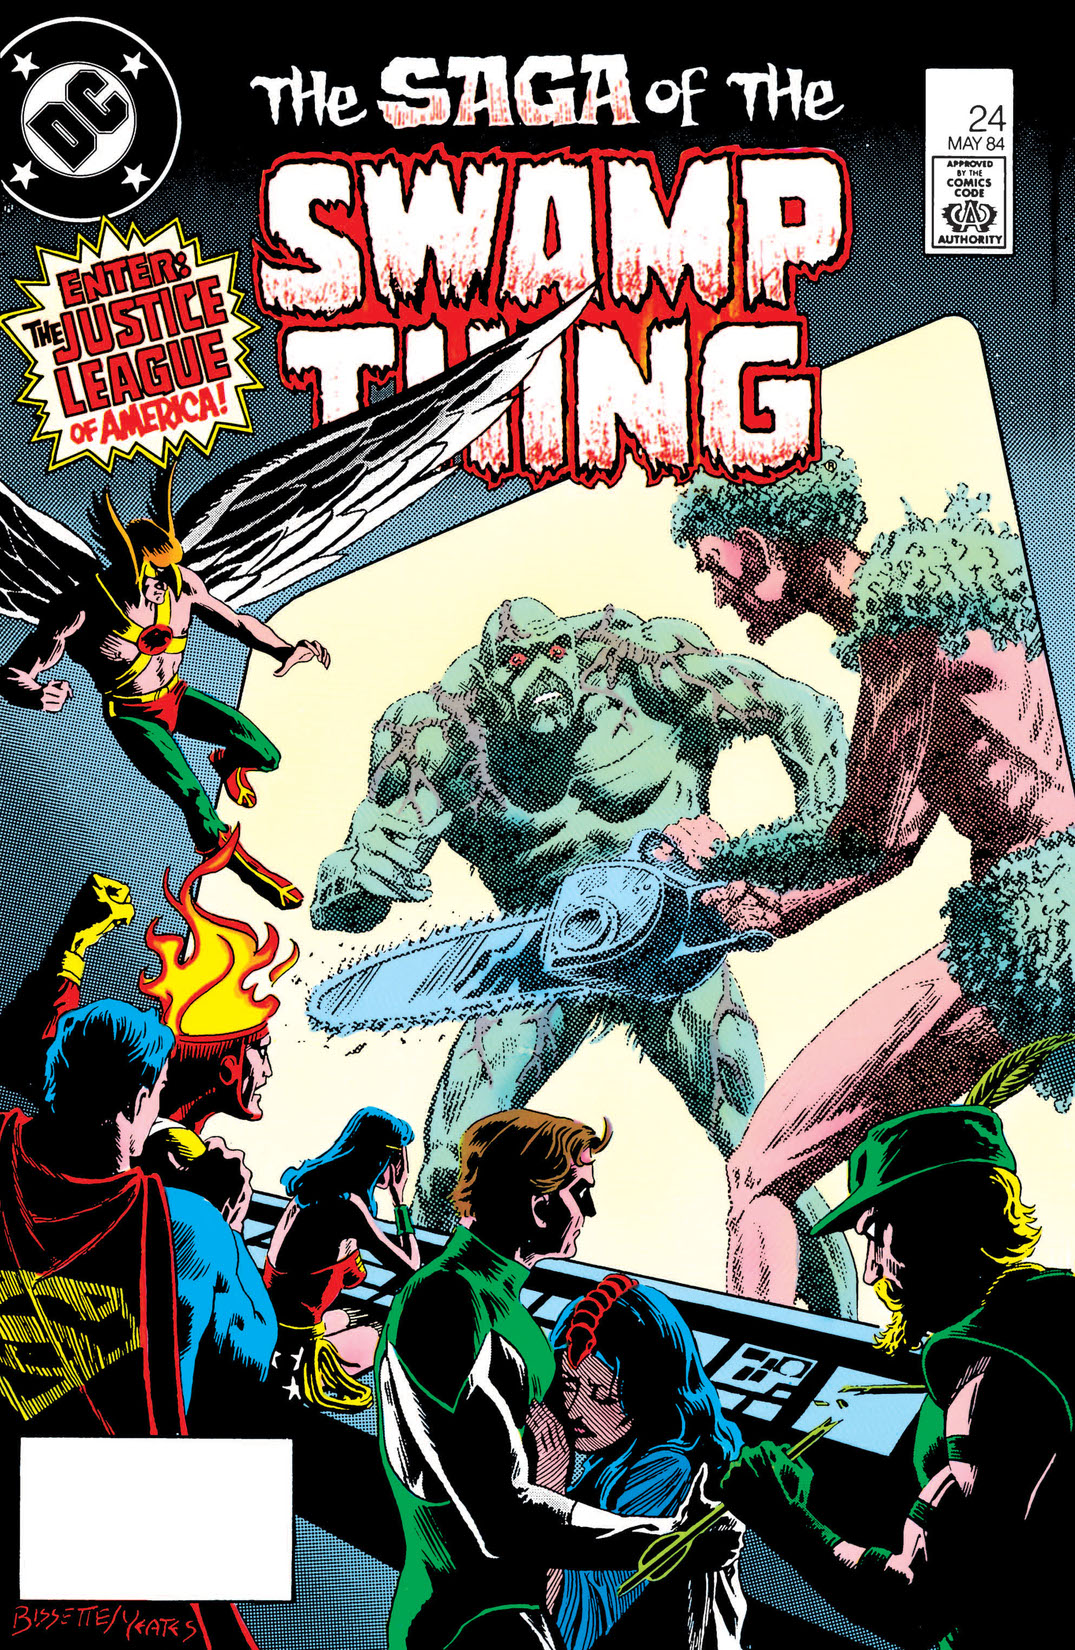 The Saga of the Swamp Thing (1982-) #24 preview images